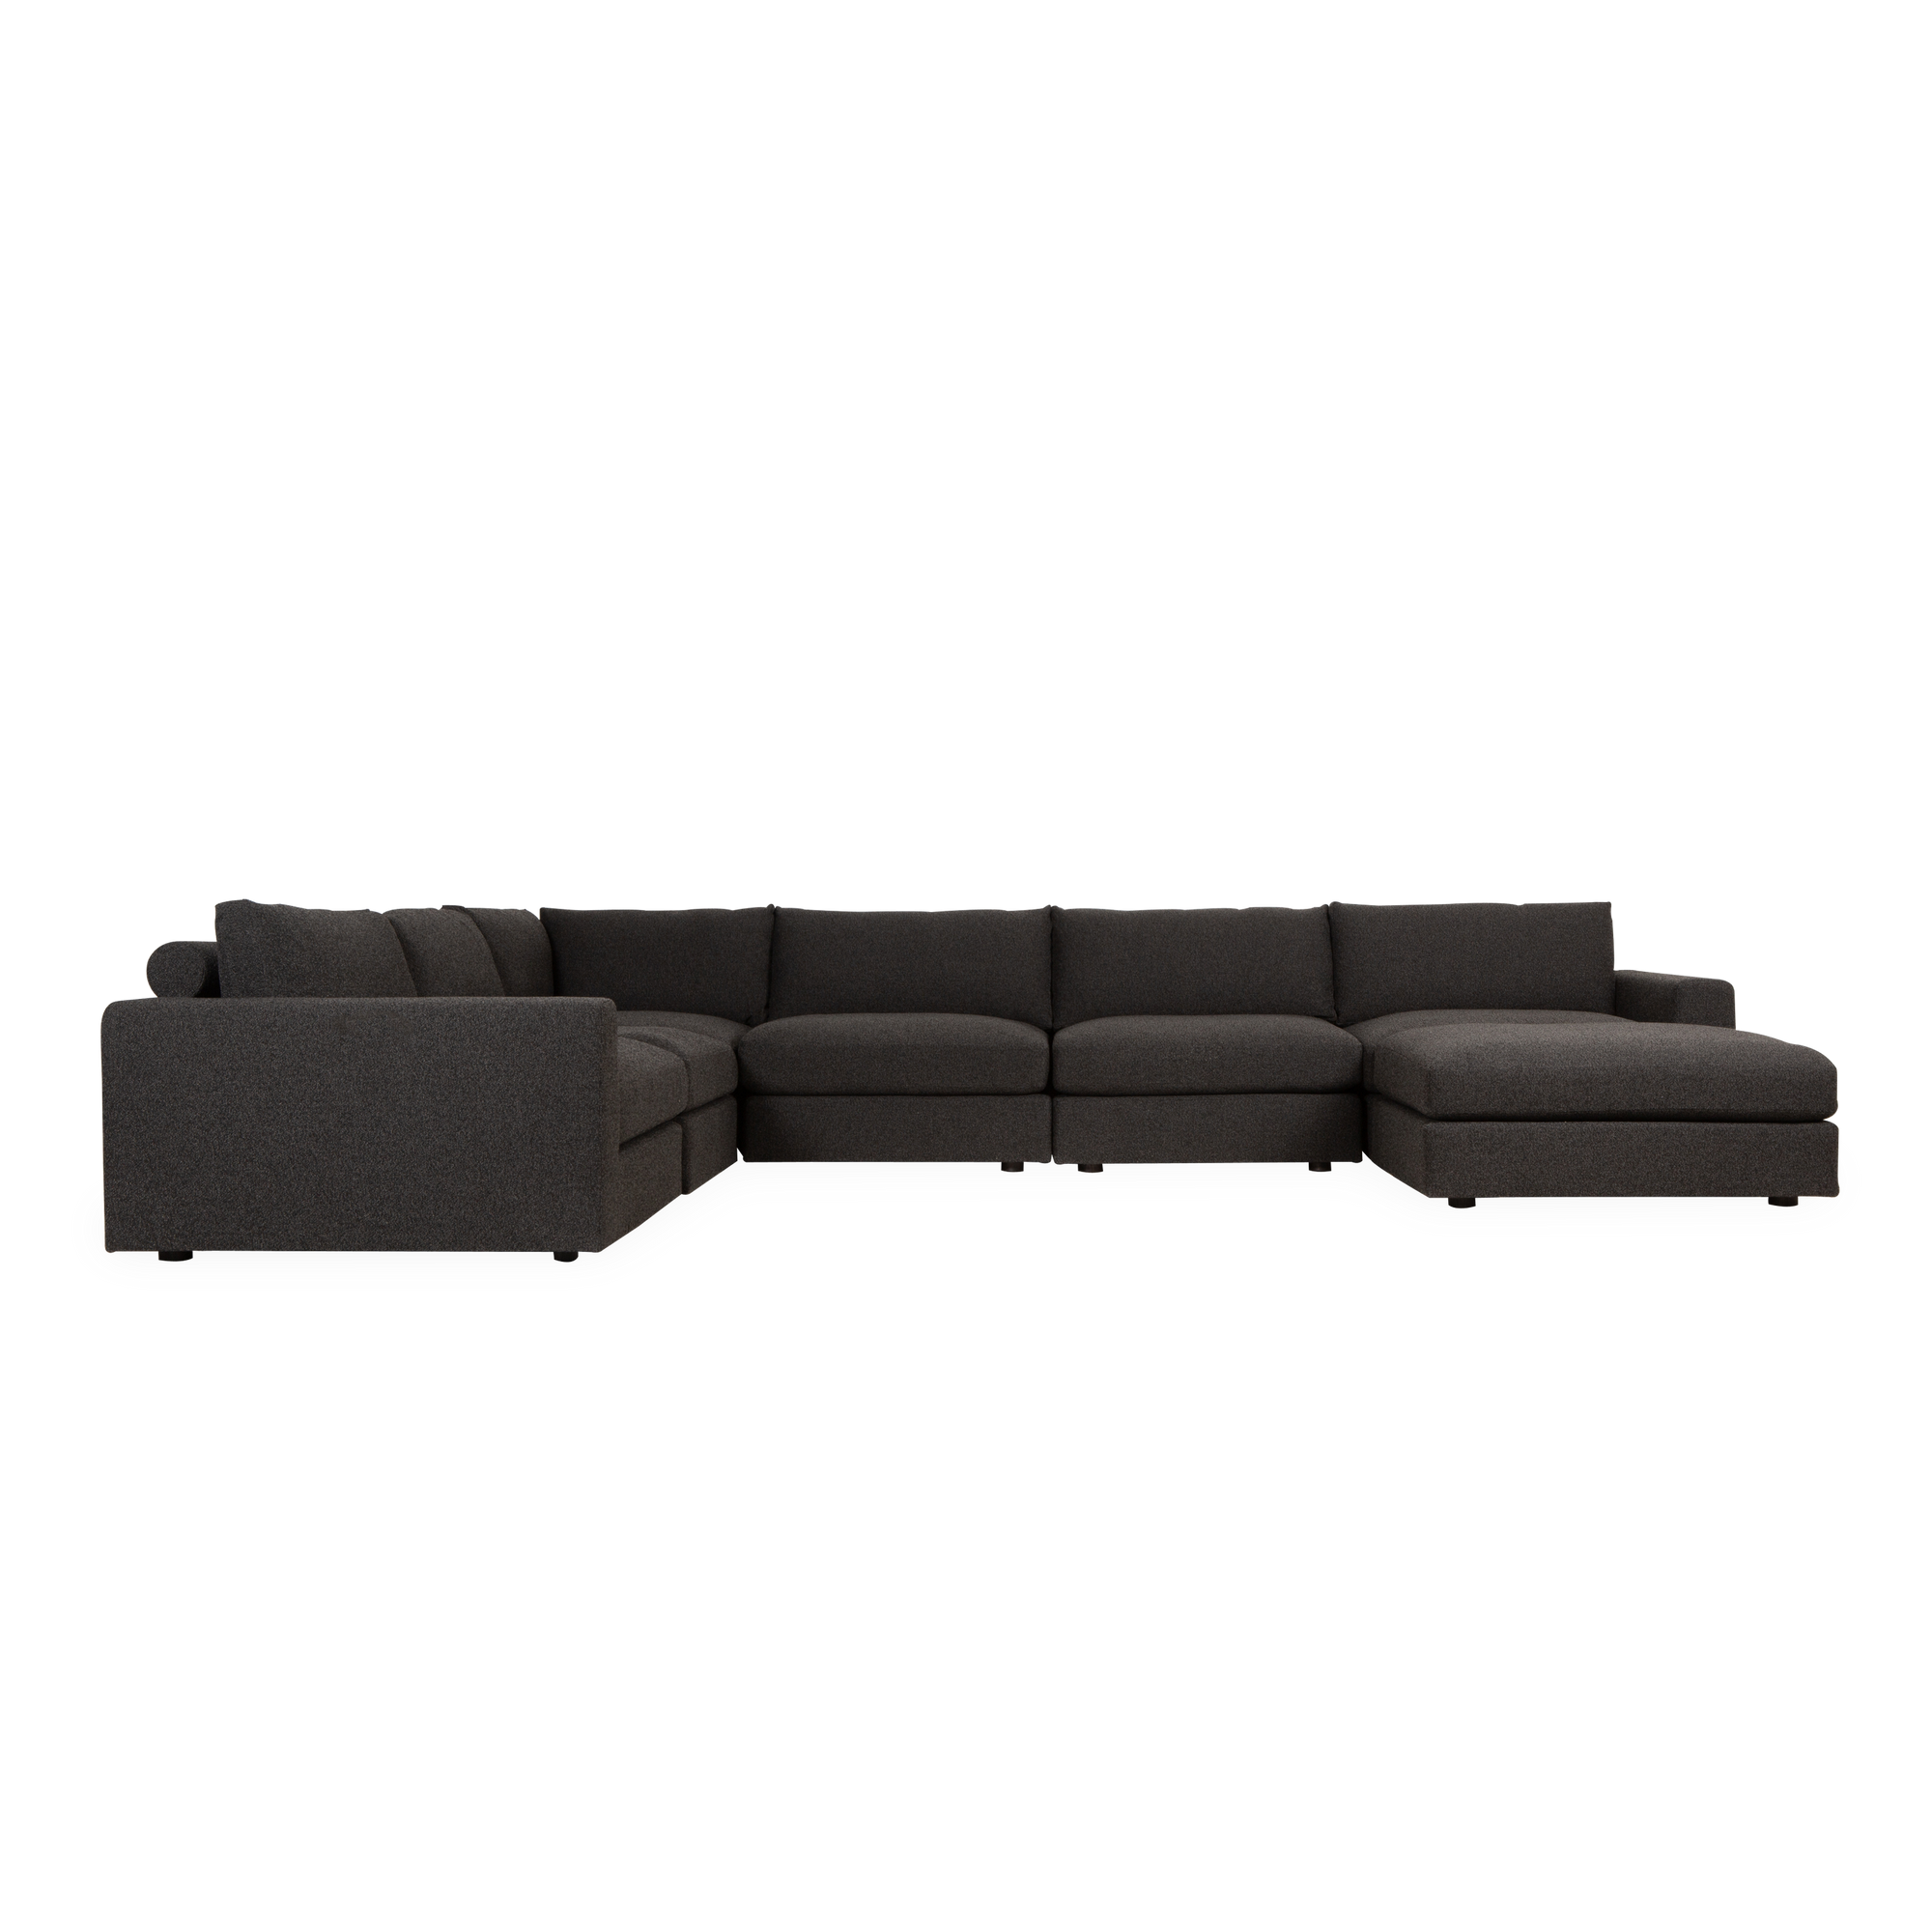 Step into a realm of timeless sophistication with our Colonna Modular Sectional—a tribute to iconic Italian design.